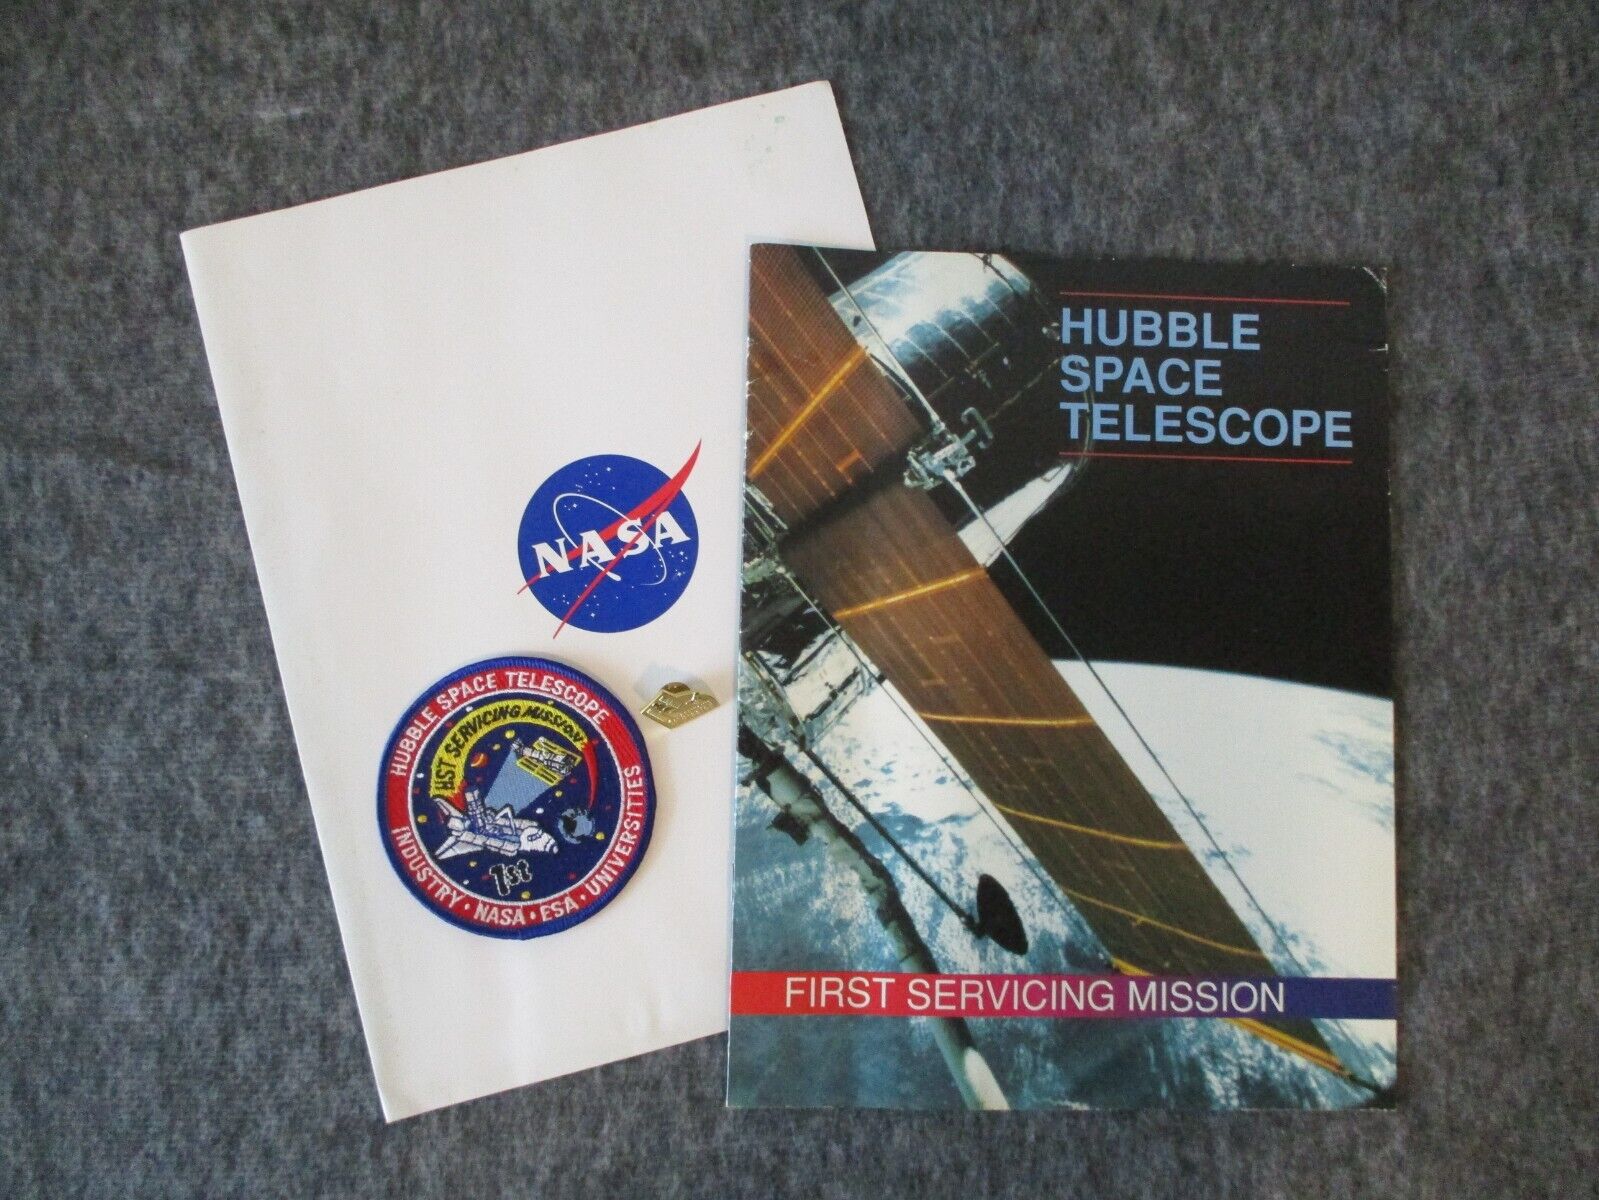 1993 NASA STS-61 HUBBLE SPACE TELESCOPE 1st SERVICING MISSION PATCH+PIN+BOOKLET